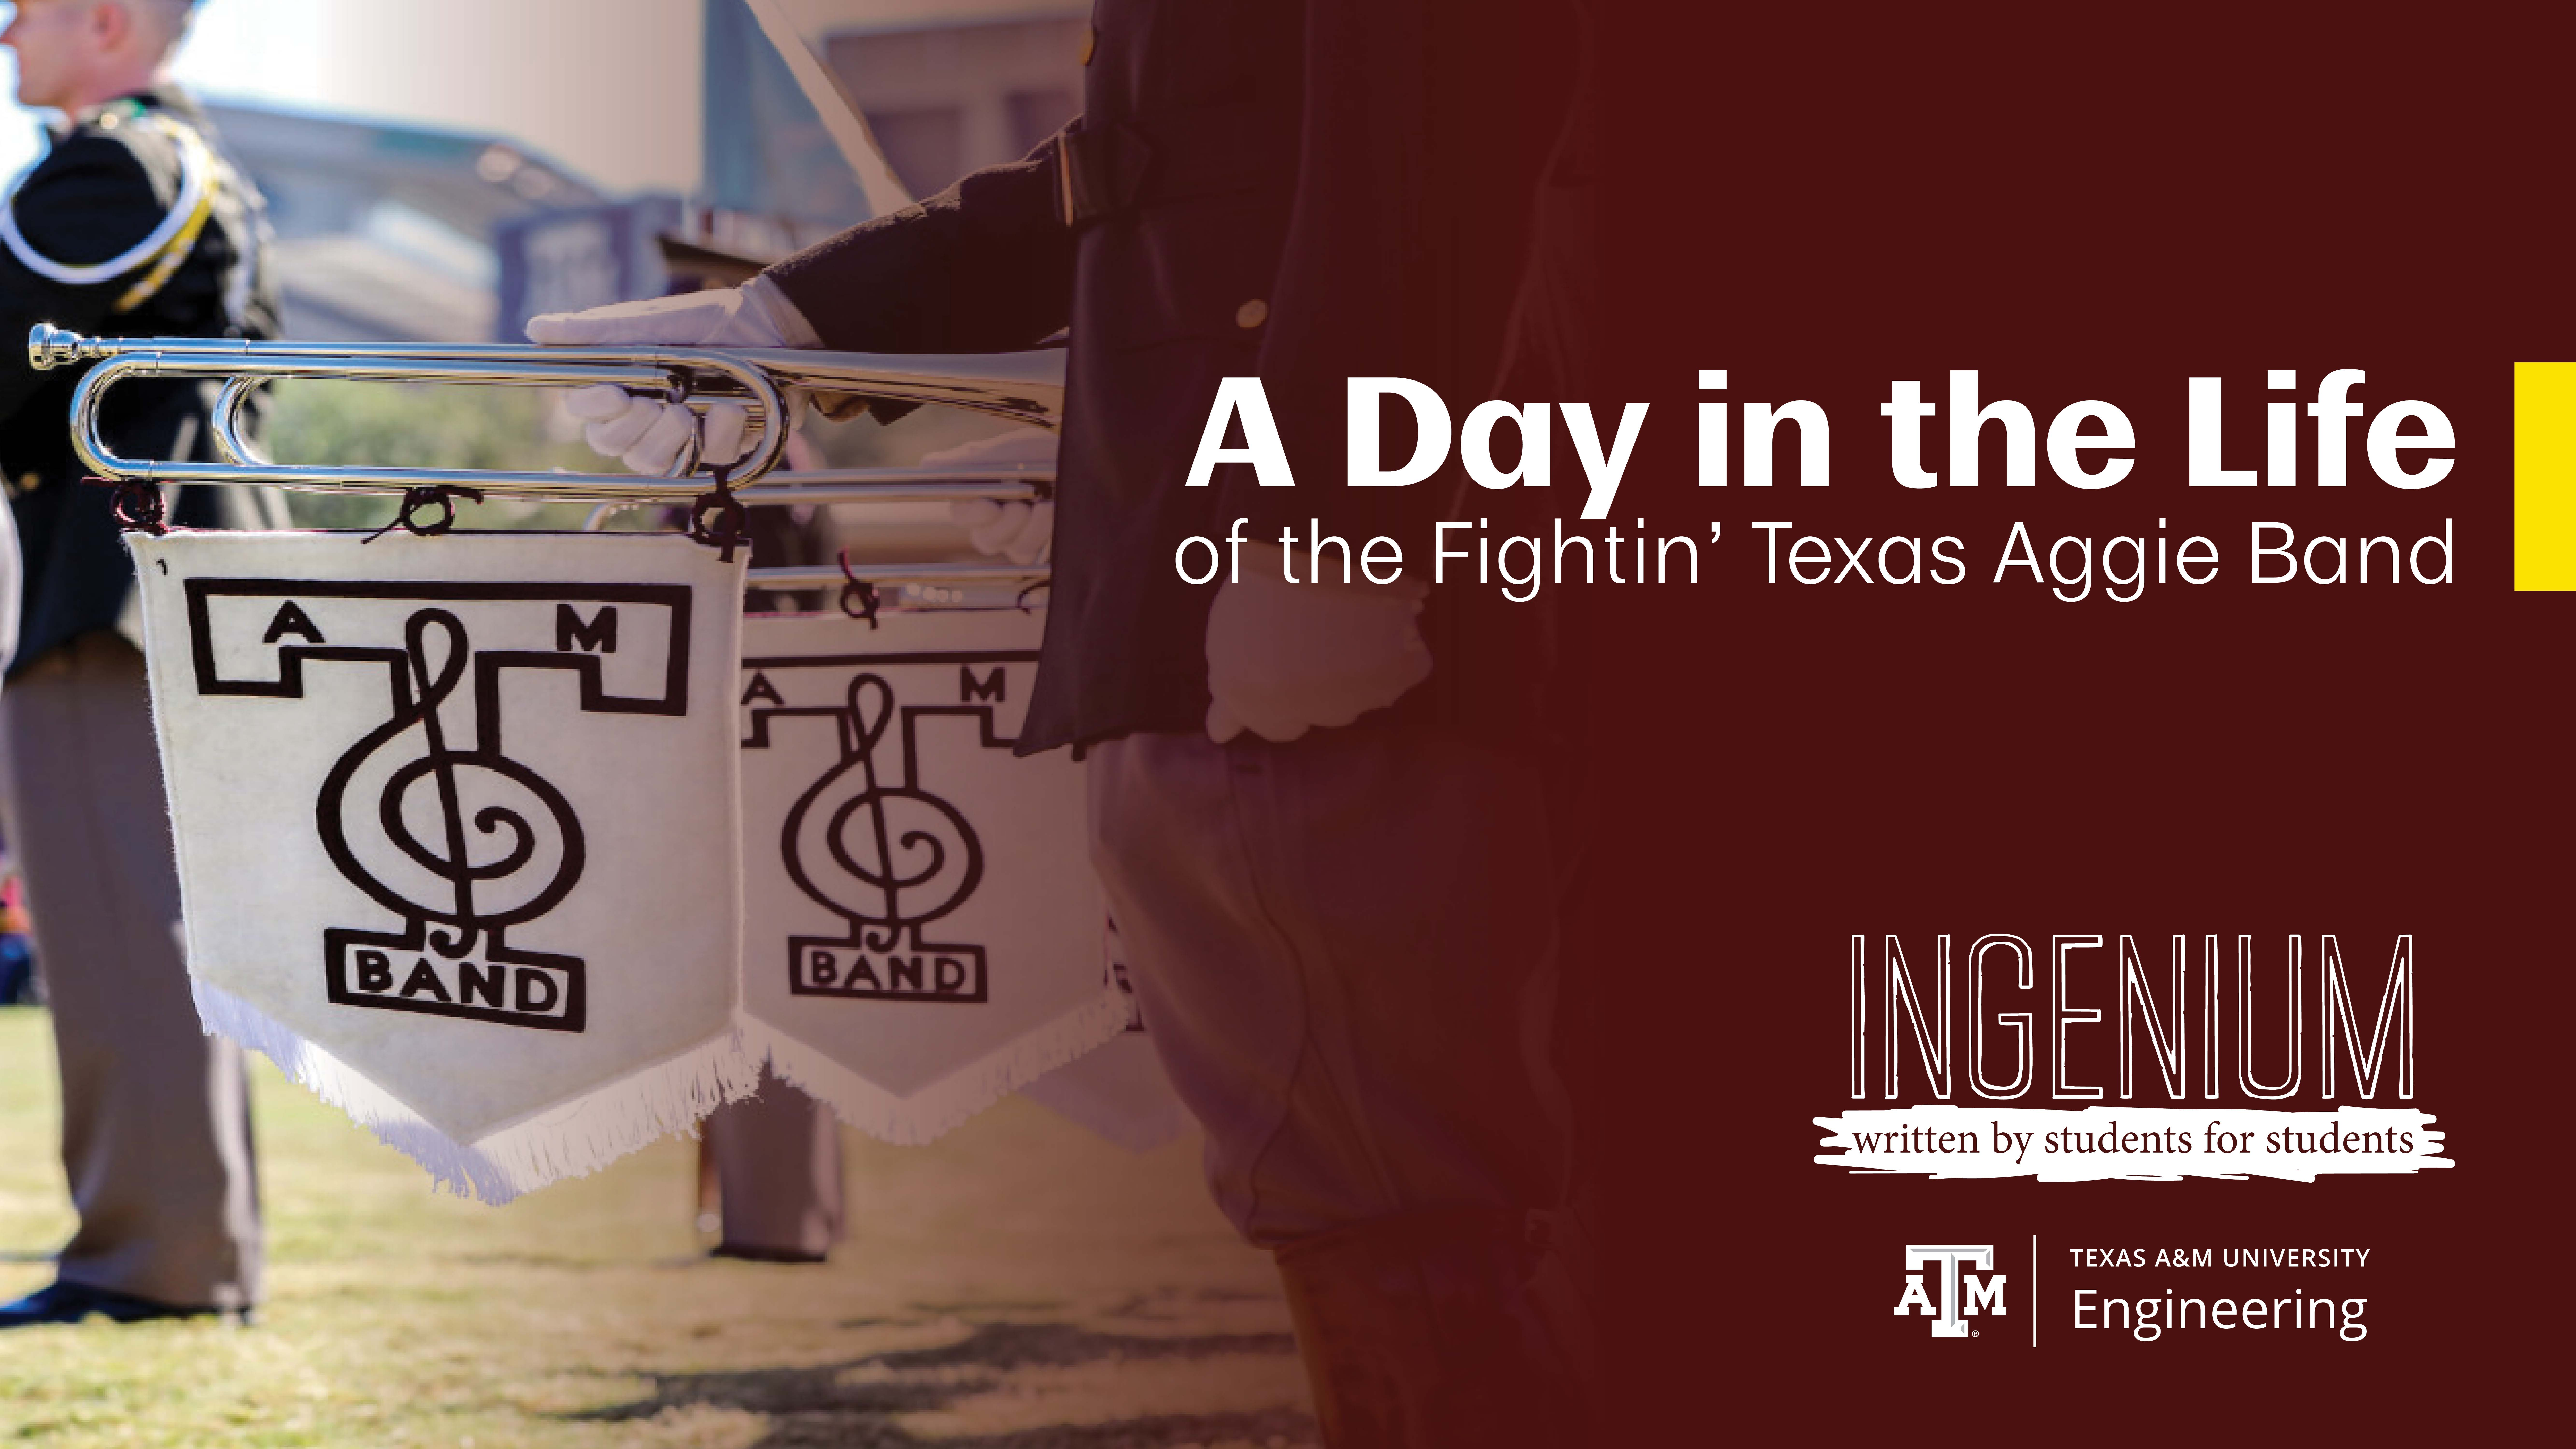 A Day in the Life of the Fightin' Texas Aggie Band